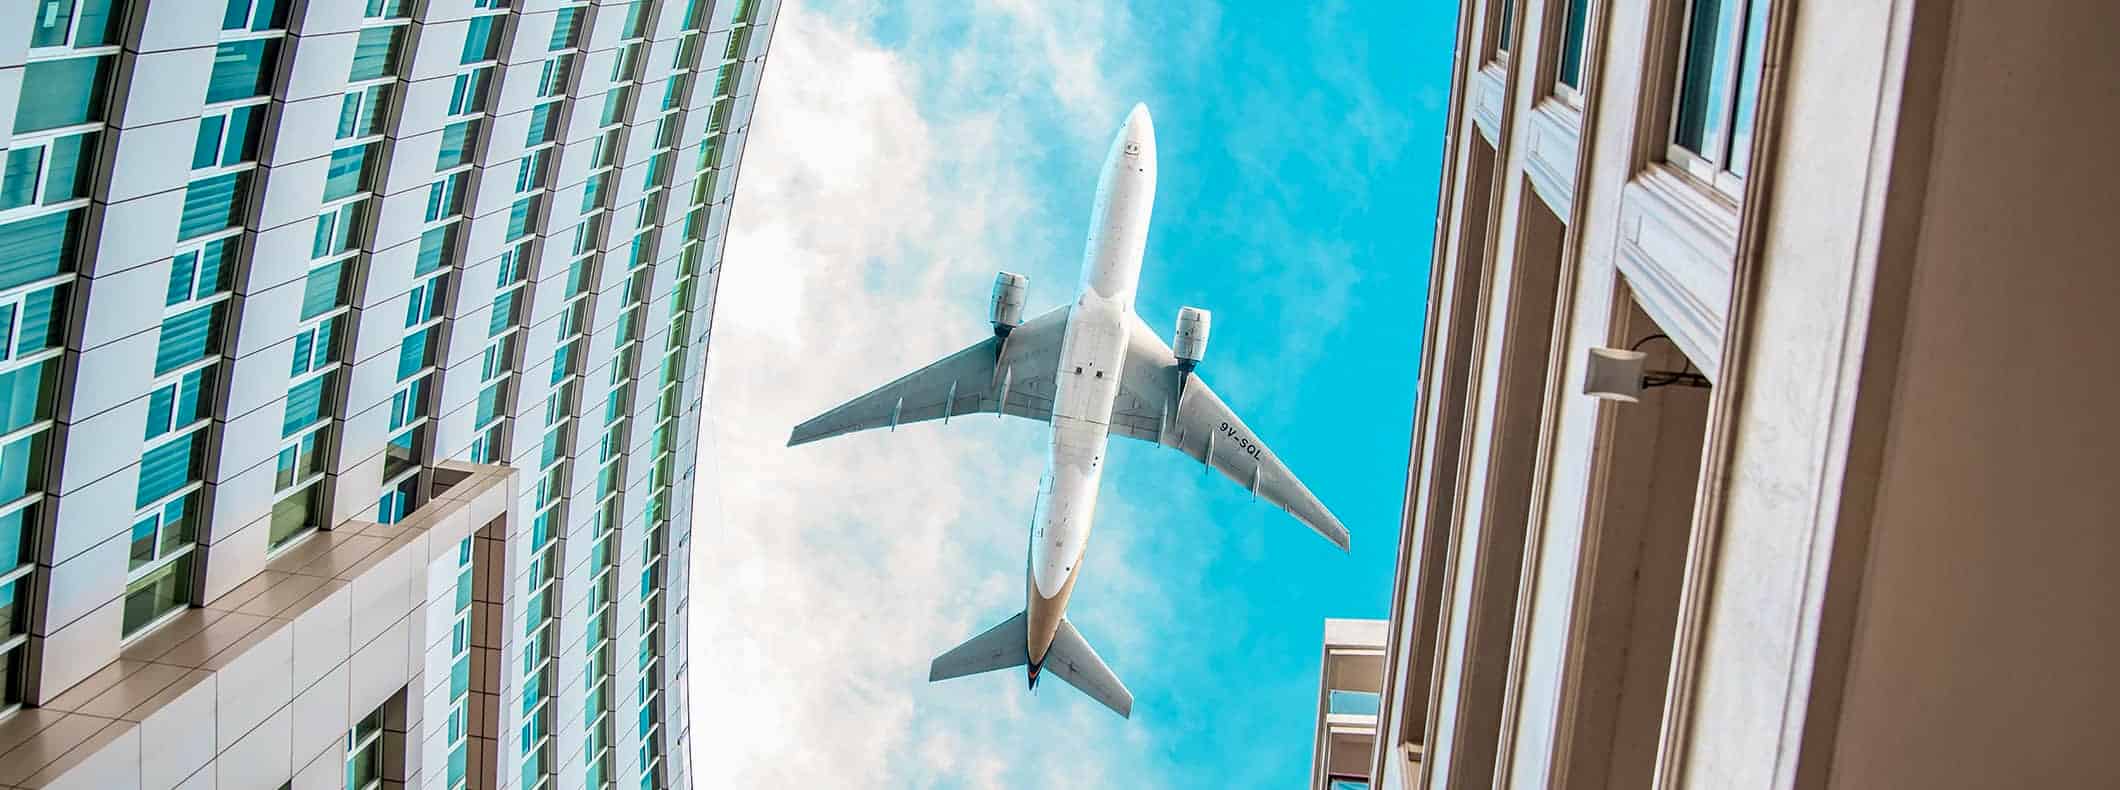 A commercial airplane flying over a city, as seen from the ground looking up between buildings